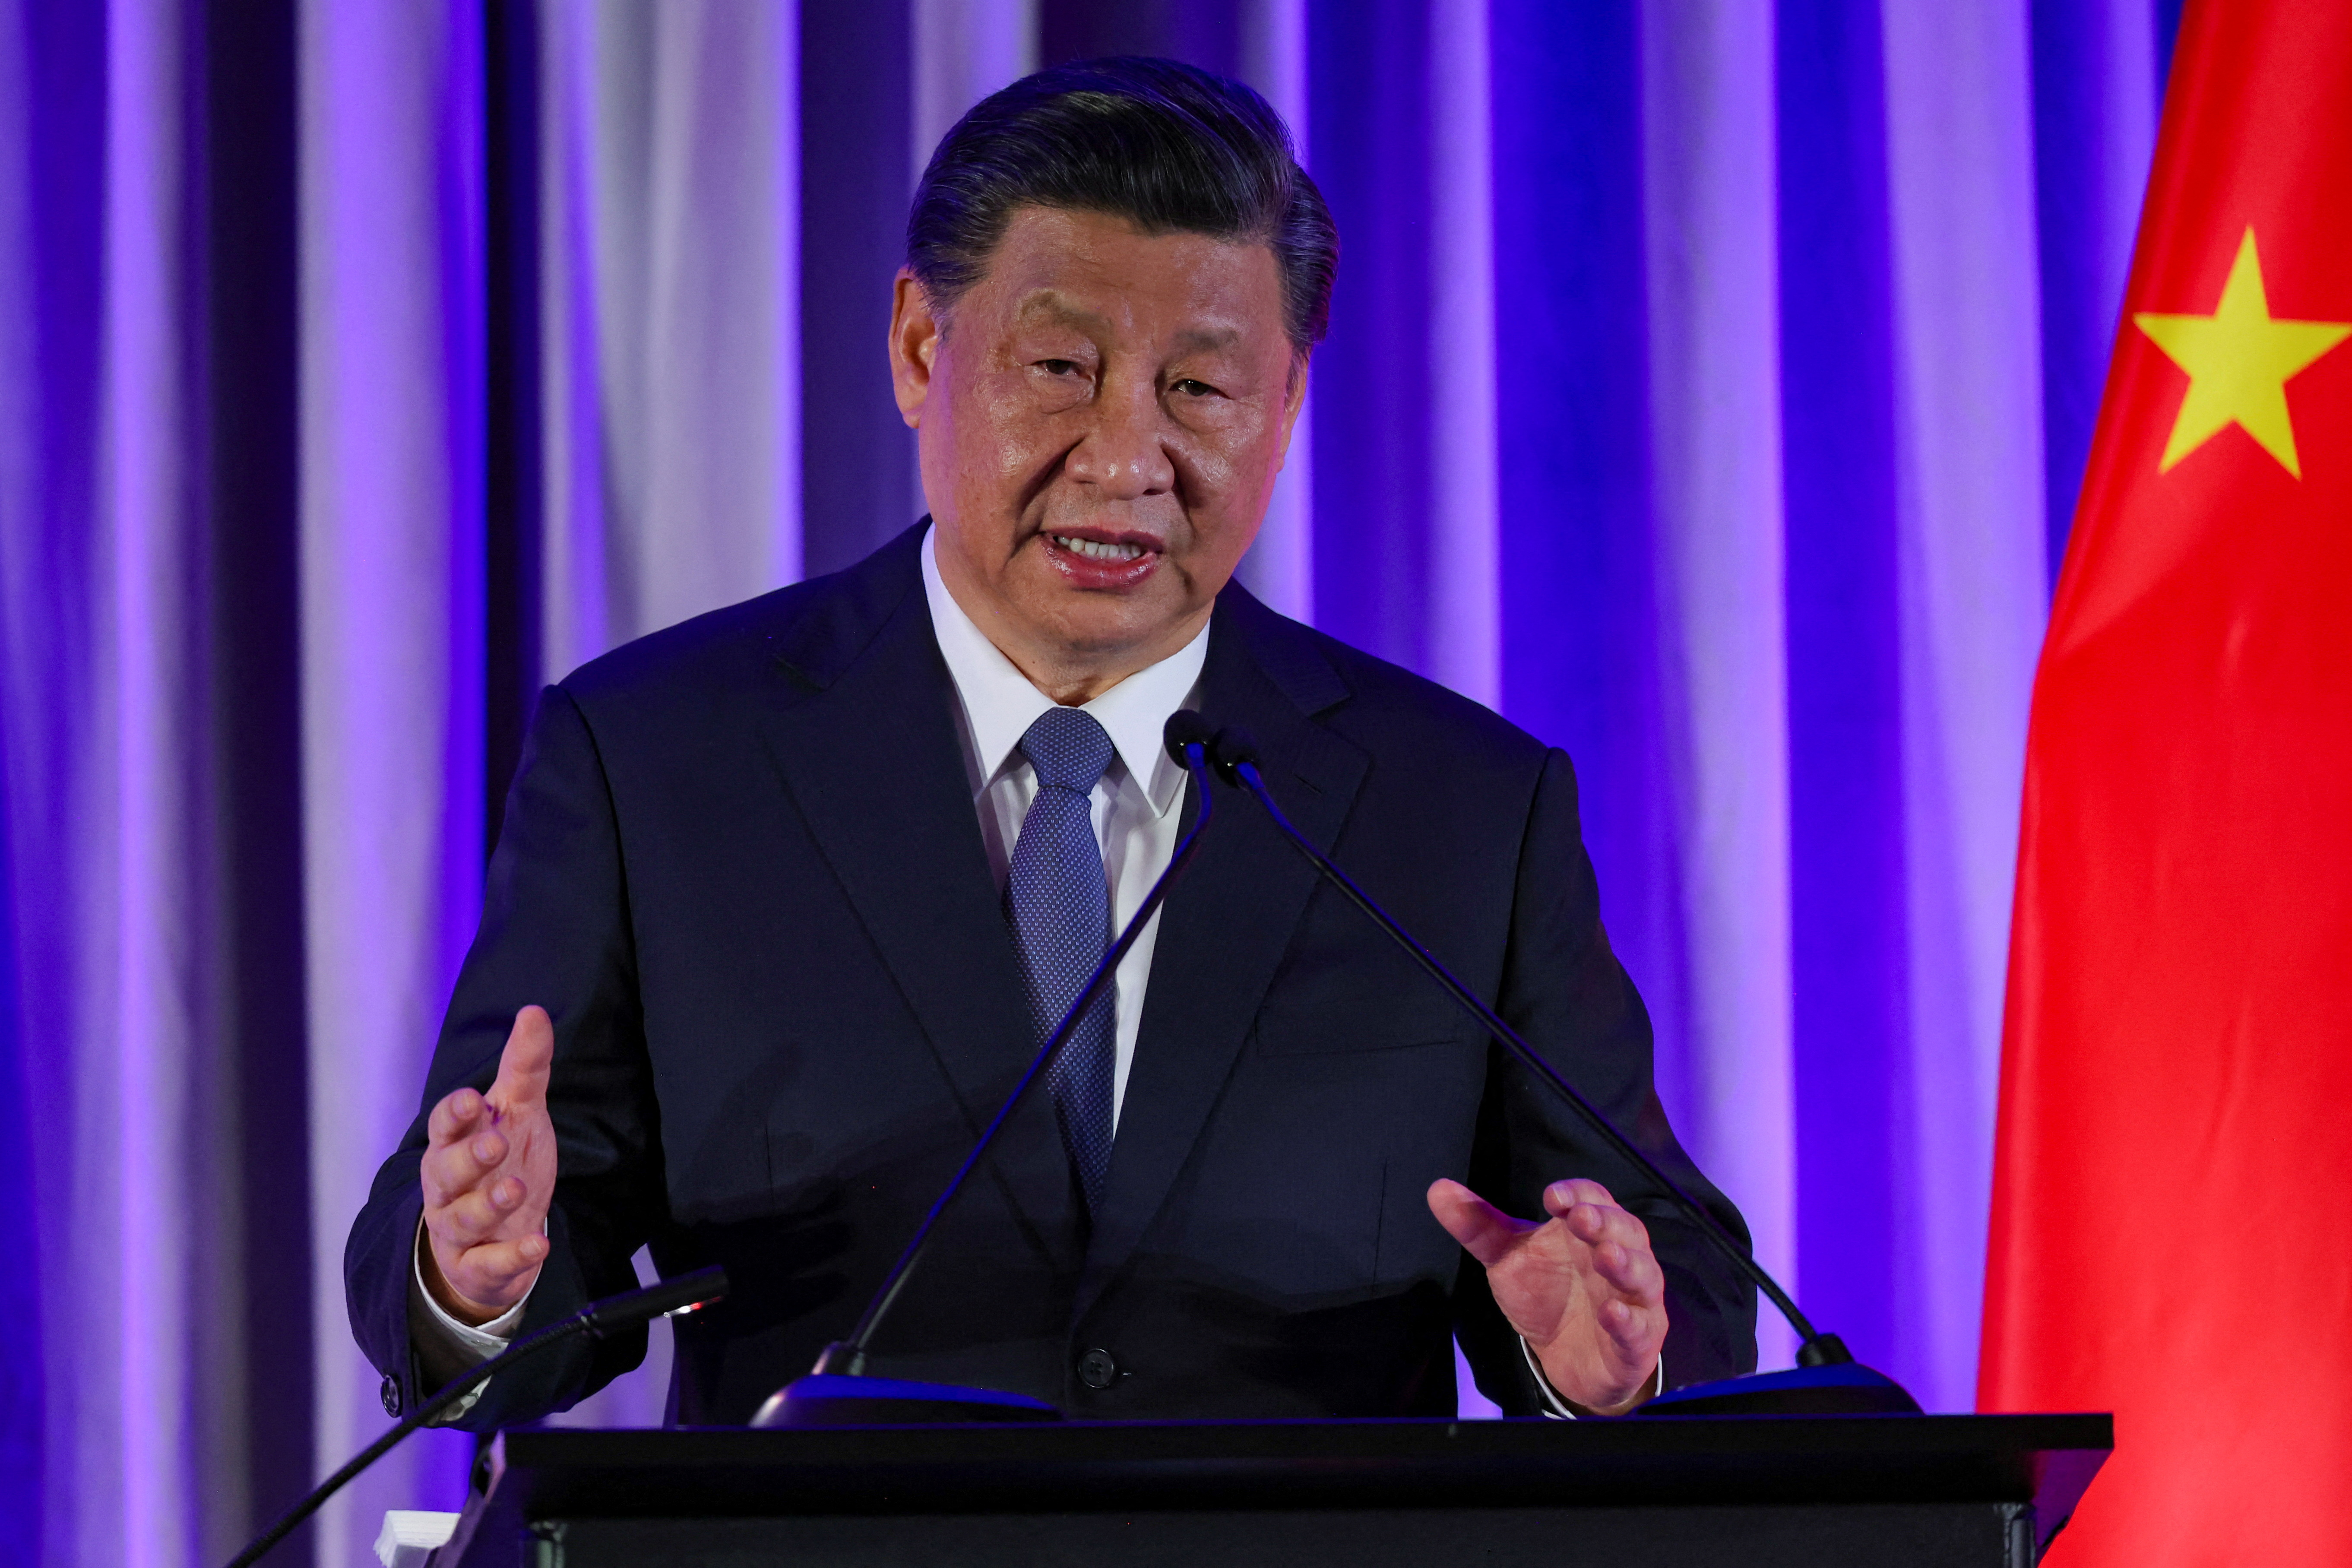 "Senior Chinese Leader Event" on the sidelines of the APEC summit, in San Francisco